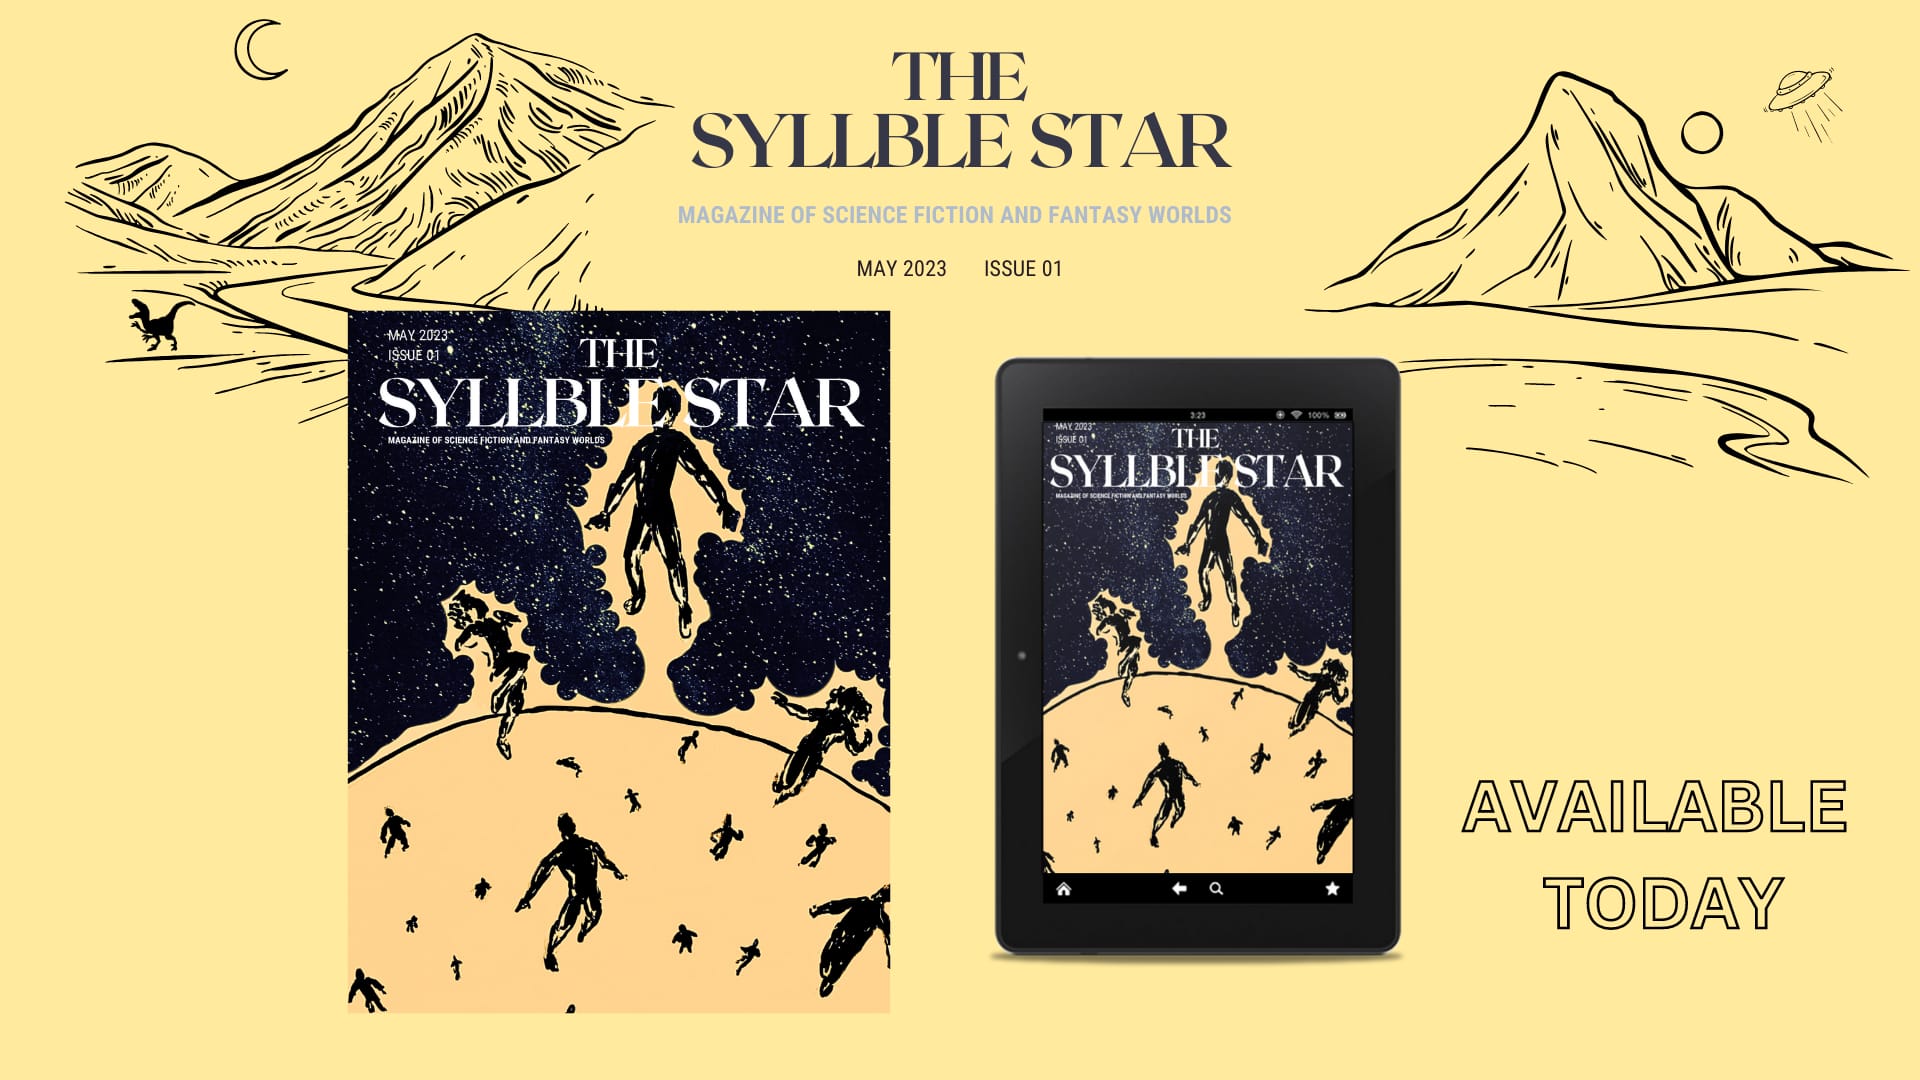 Syllble Studios Unveils the Inaugural Issue of The Syllble Star Magazine through Its Imprint